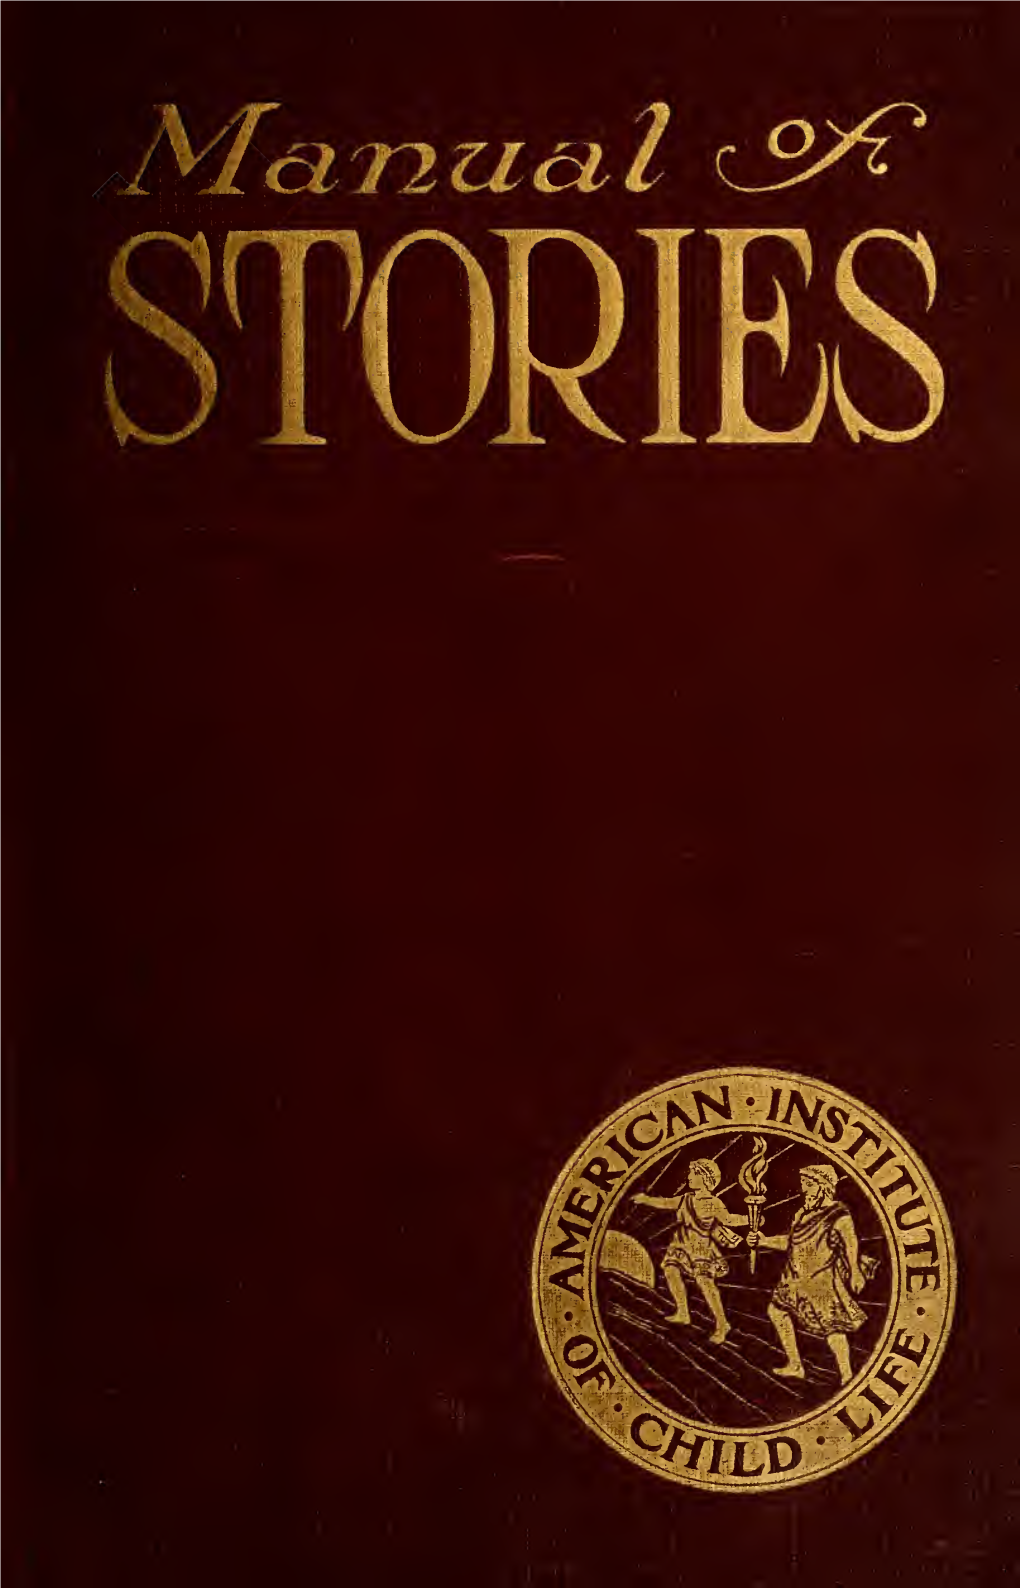 A Manual of Stories